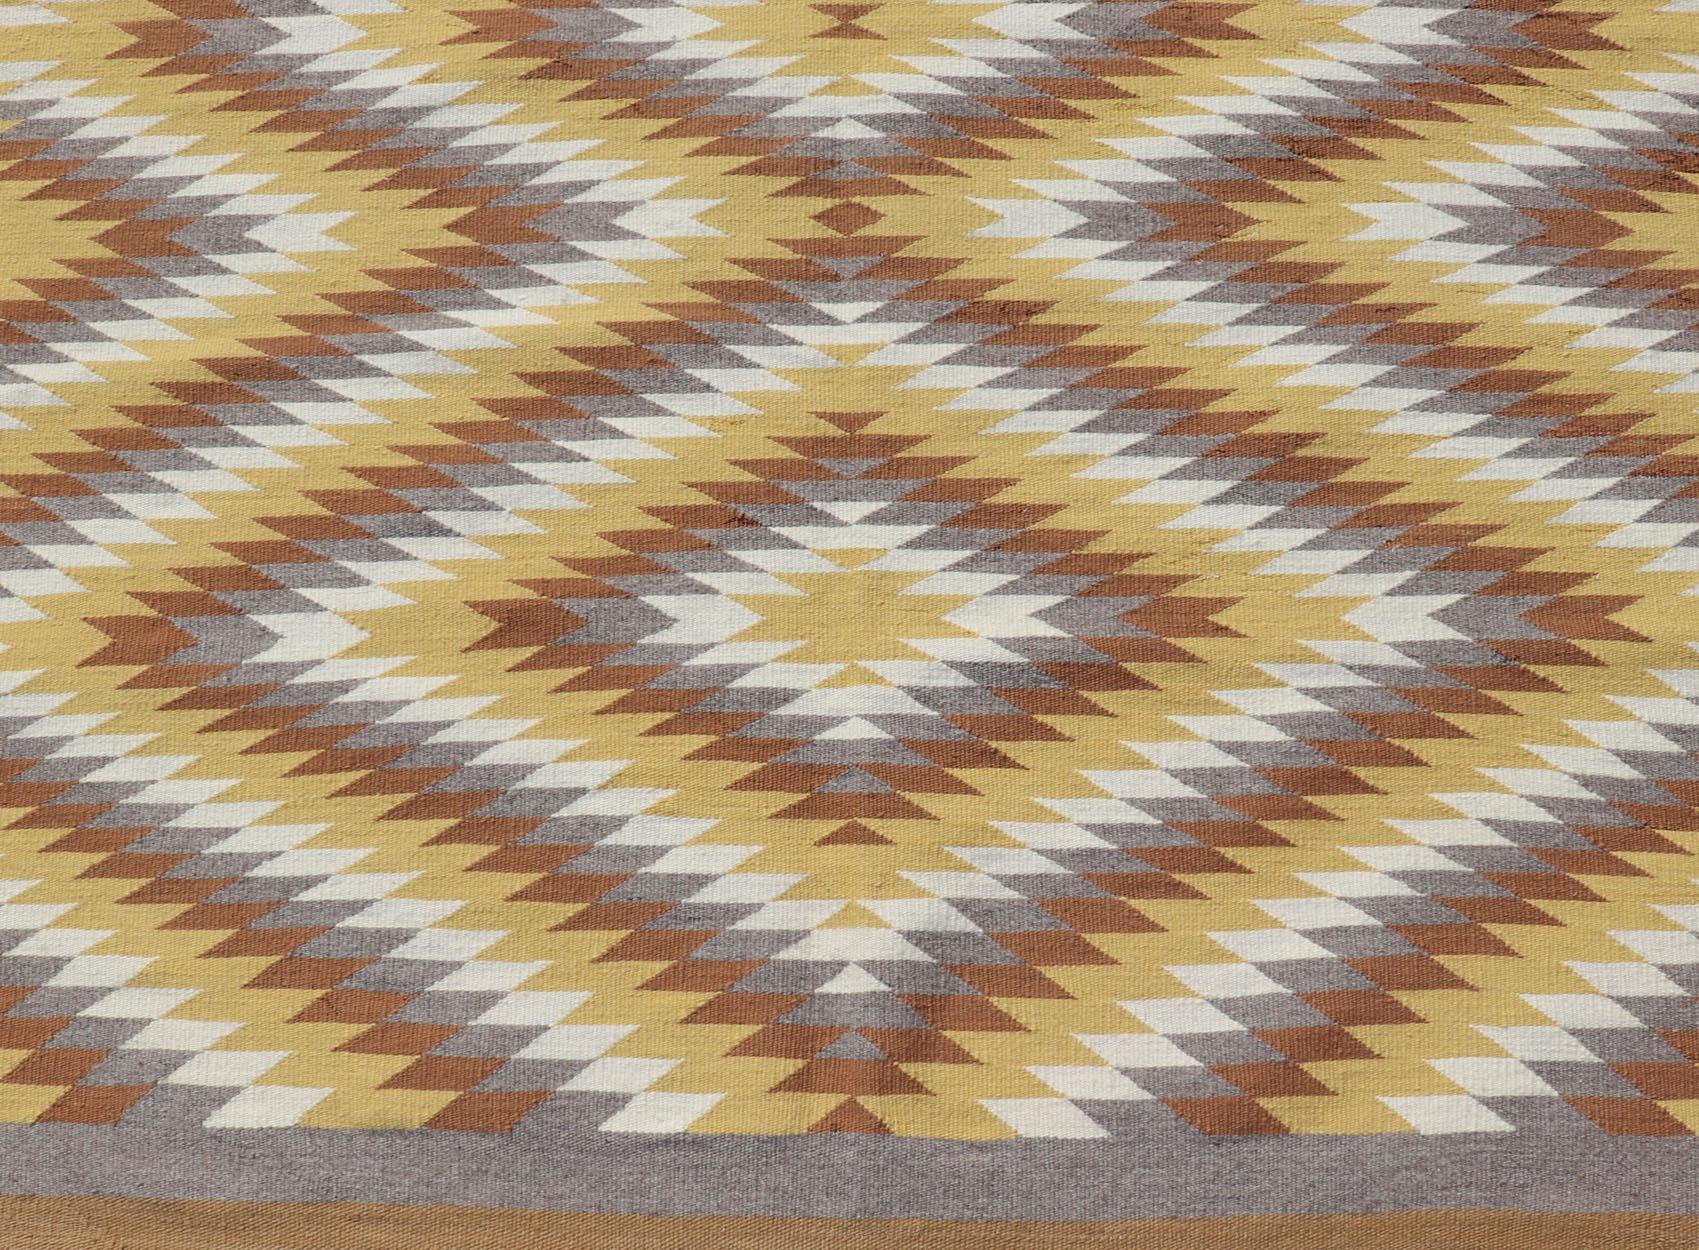 Tribal hand woven vintage Navajo Kilim with gold, gray, ivory, and brown. Keivan Woven Arts / rug / X23-0106, country of origin / type: America / Navajo, circa 1960.

Measures:4'6 x 6'0 

This intriguing Navajo Kilim, circa 1960 was woven in the